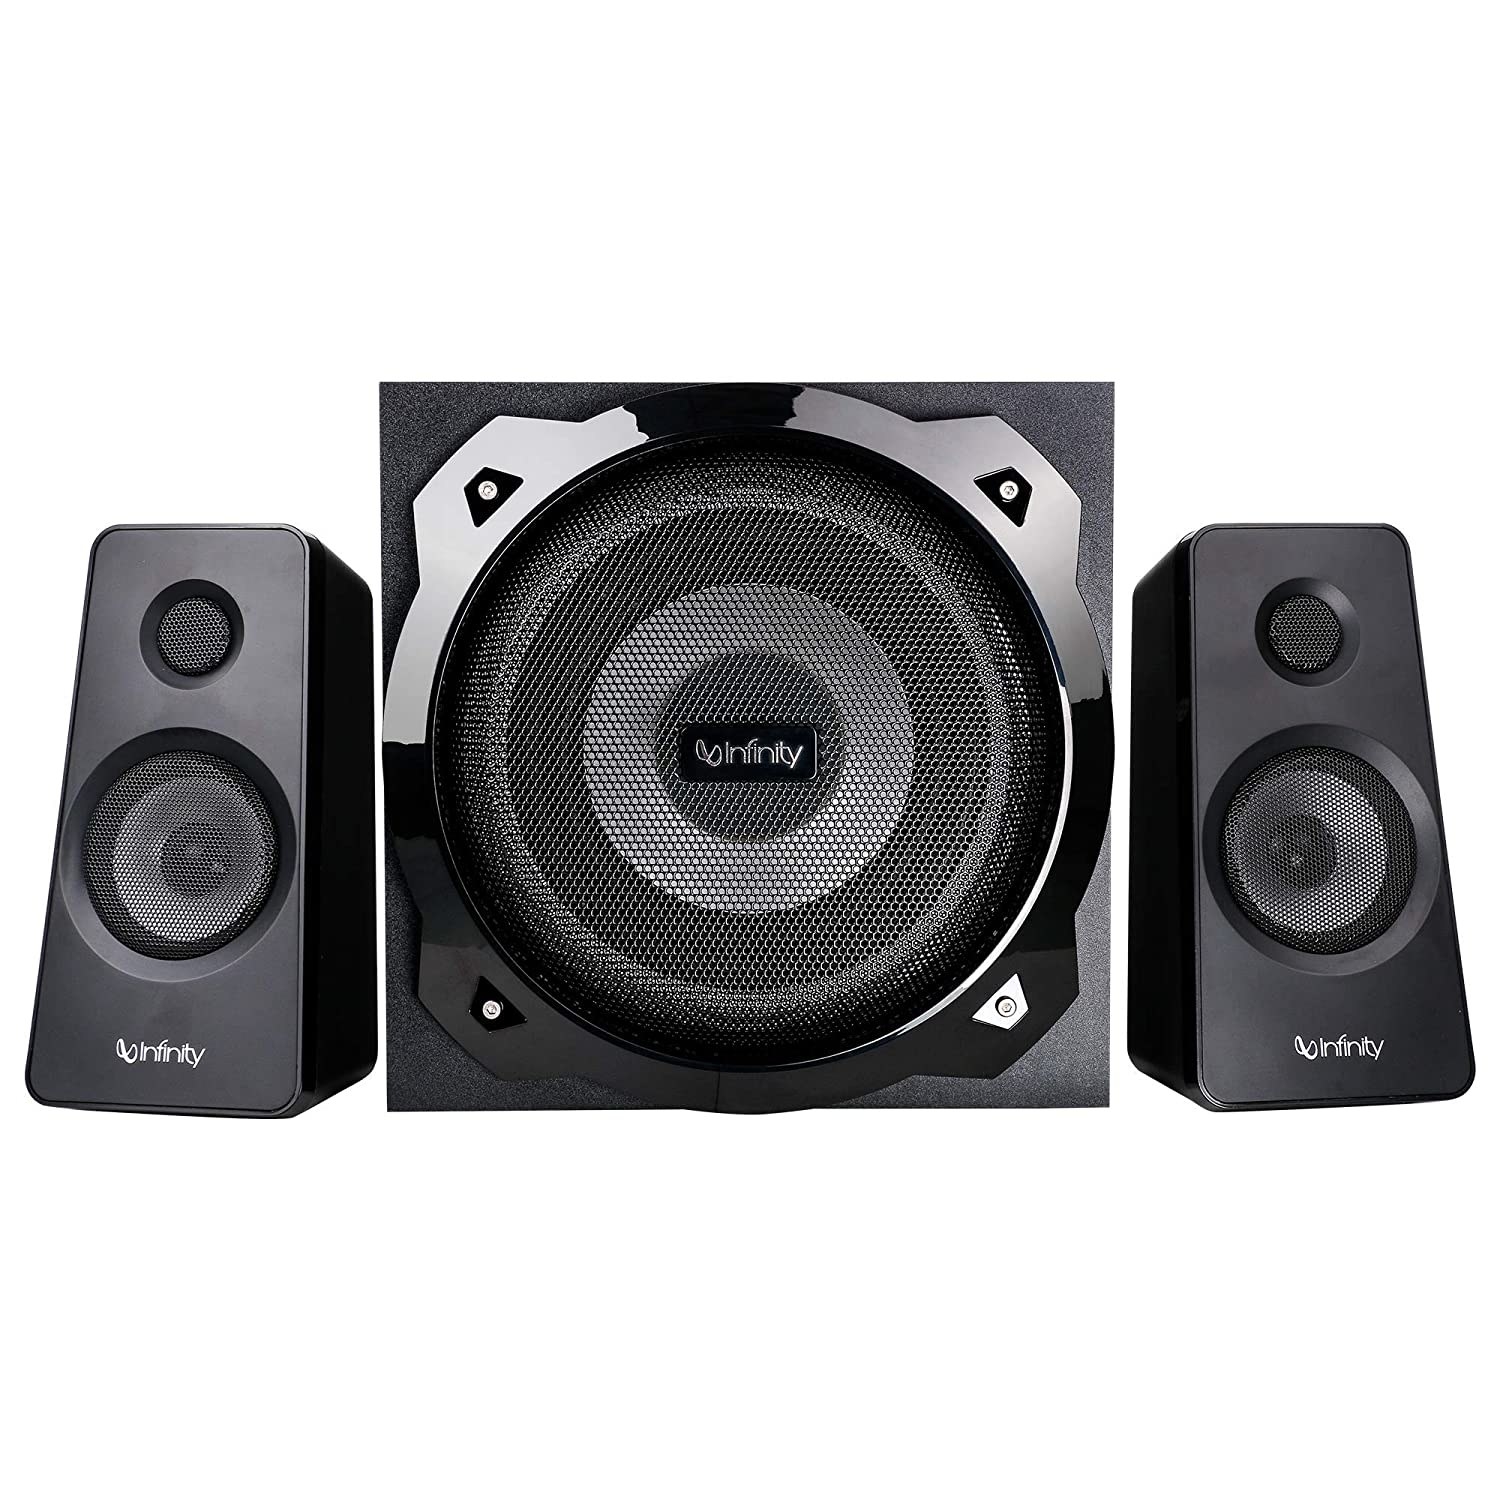 Highly-Rated Speaker Systems Under ₹5,000